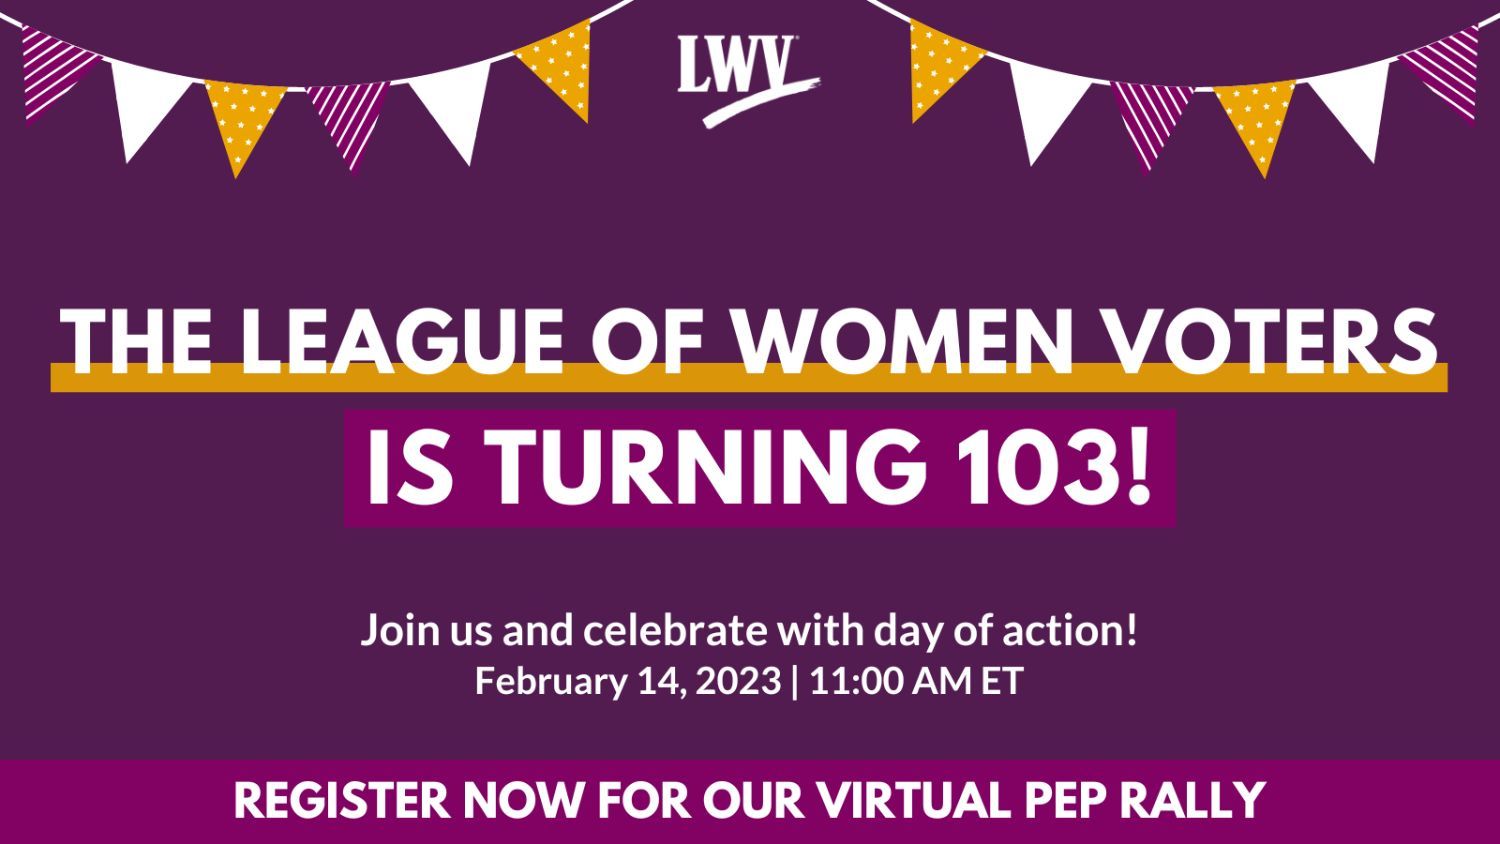 Purple image with LWV white logo and birthday banners. 